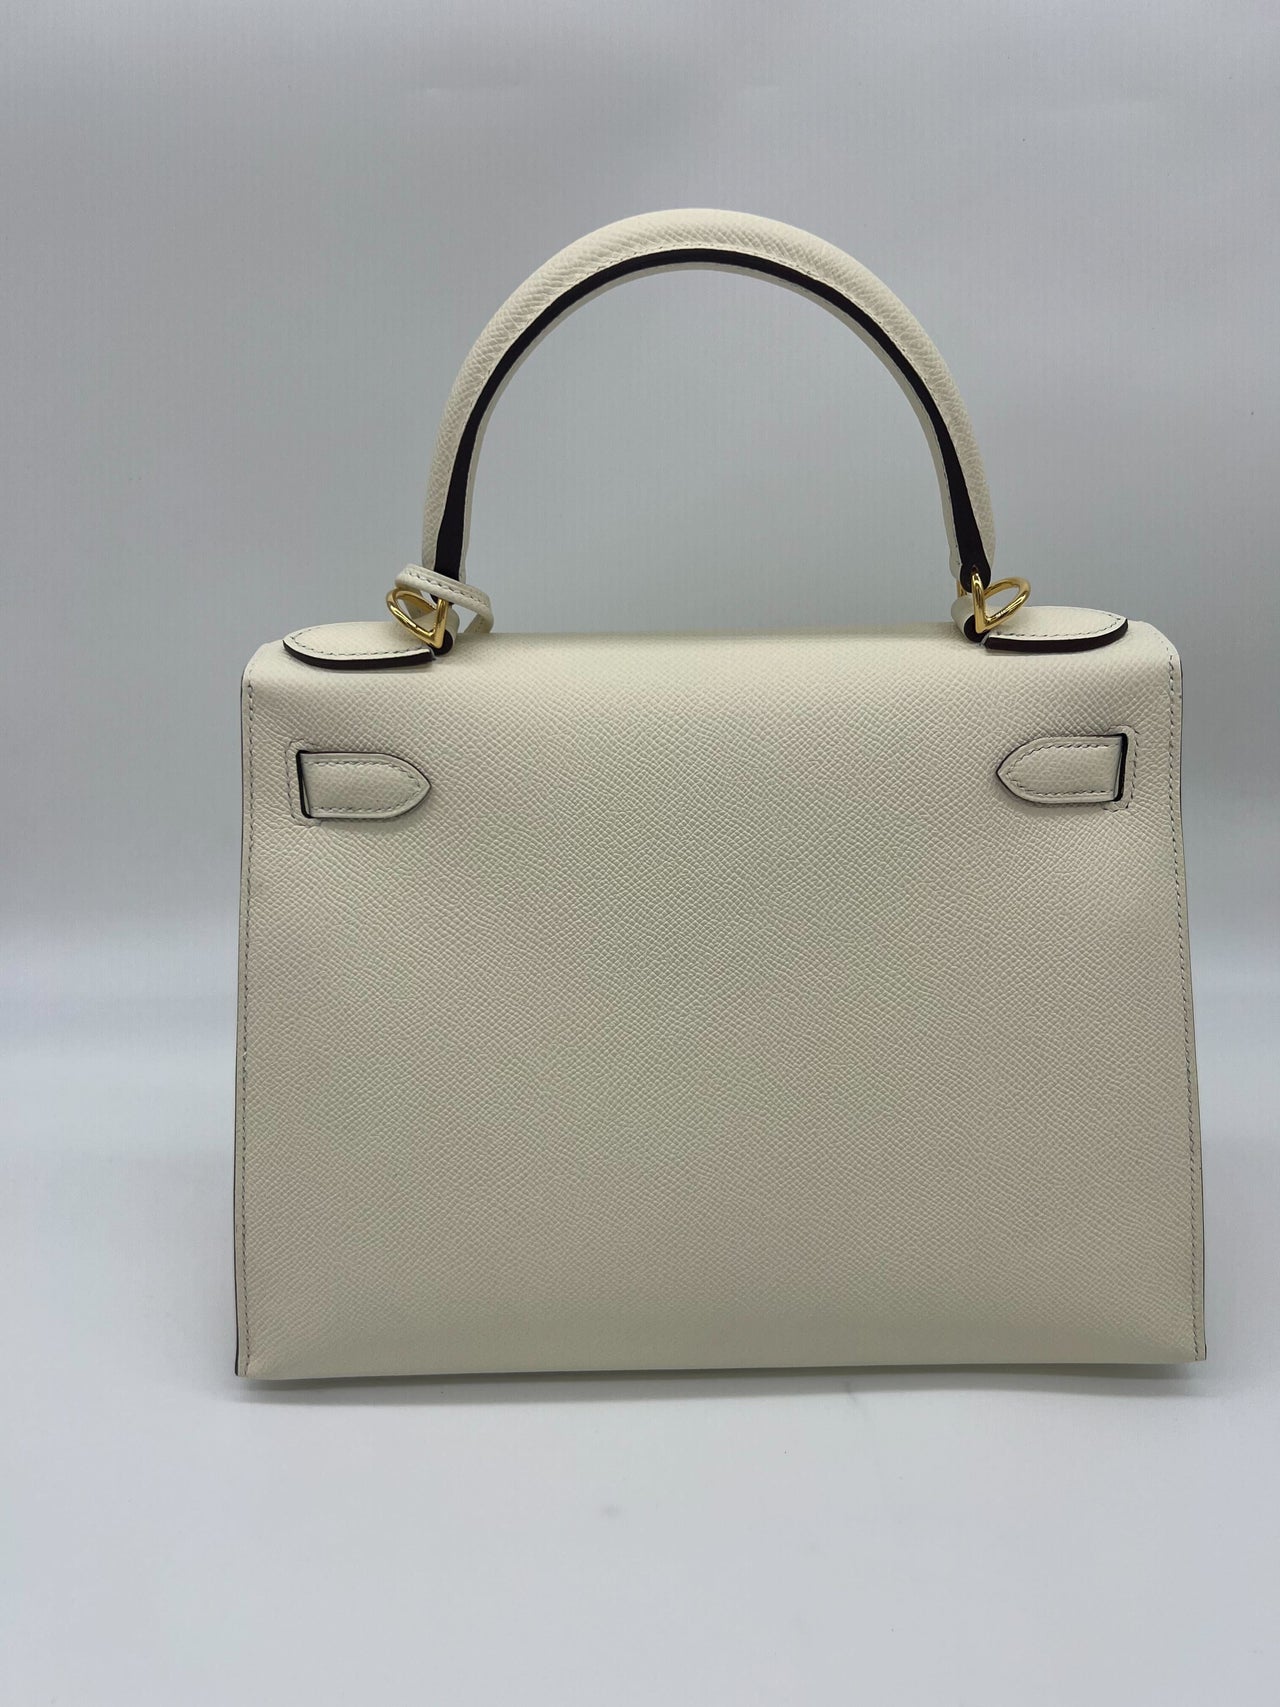 Bags & Accessories Hermes Kelly 28 Nata Epsom Gold Hardware Wrist ...